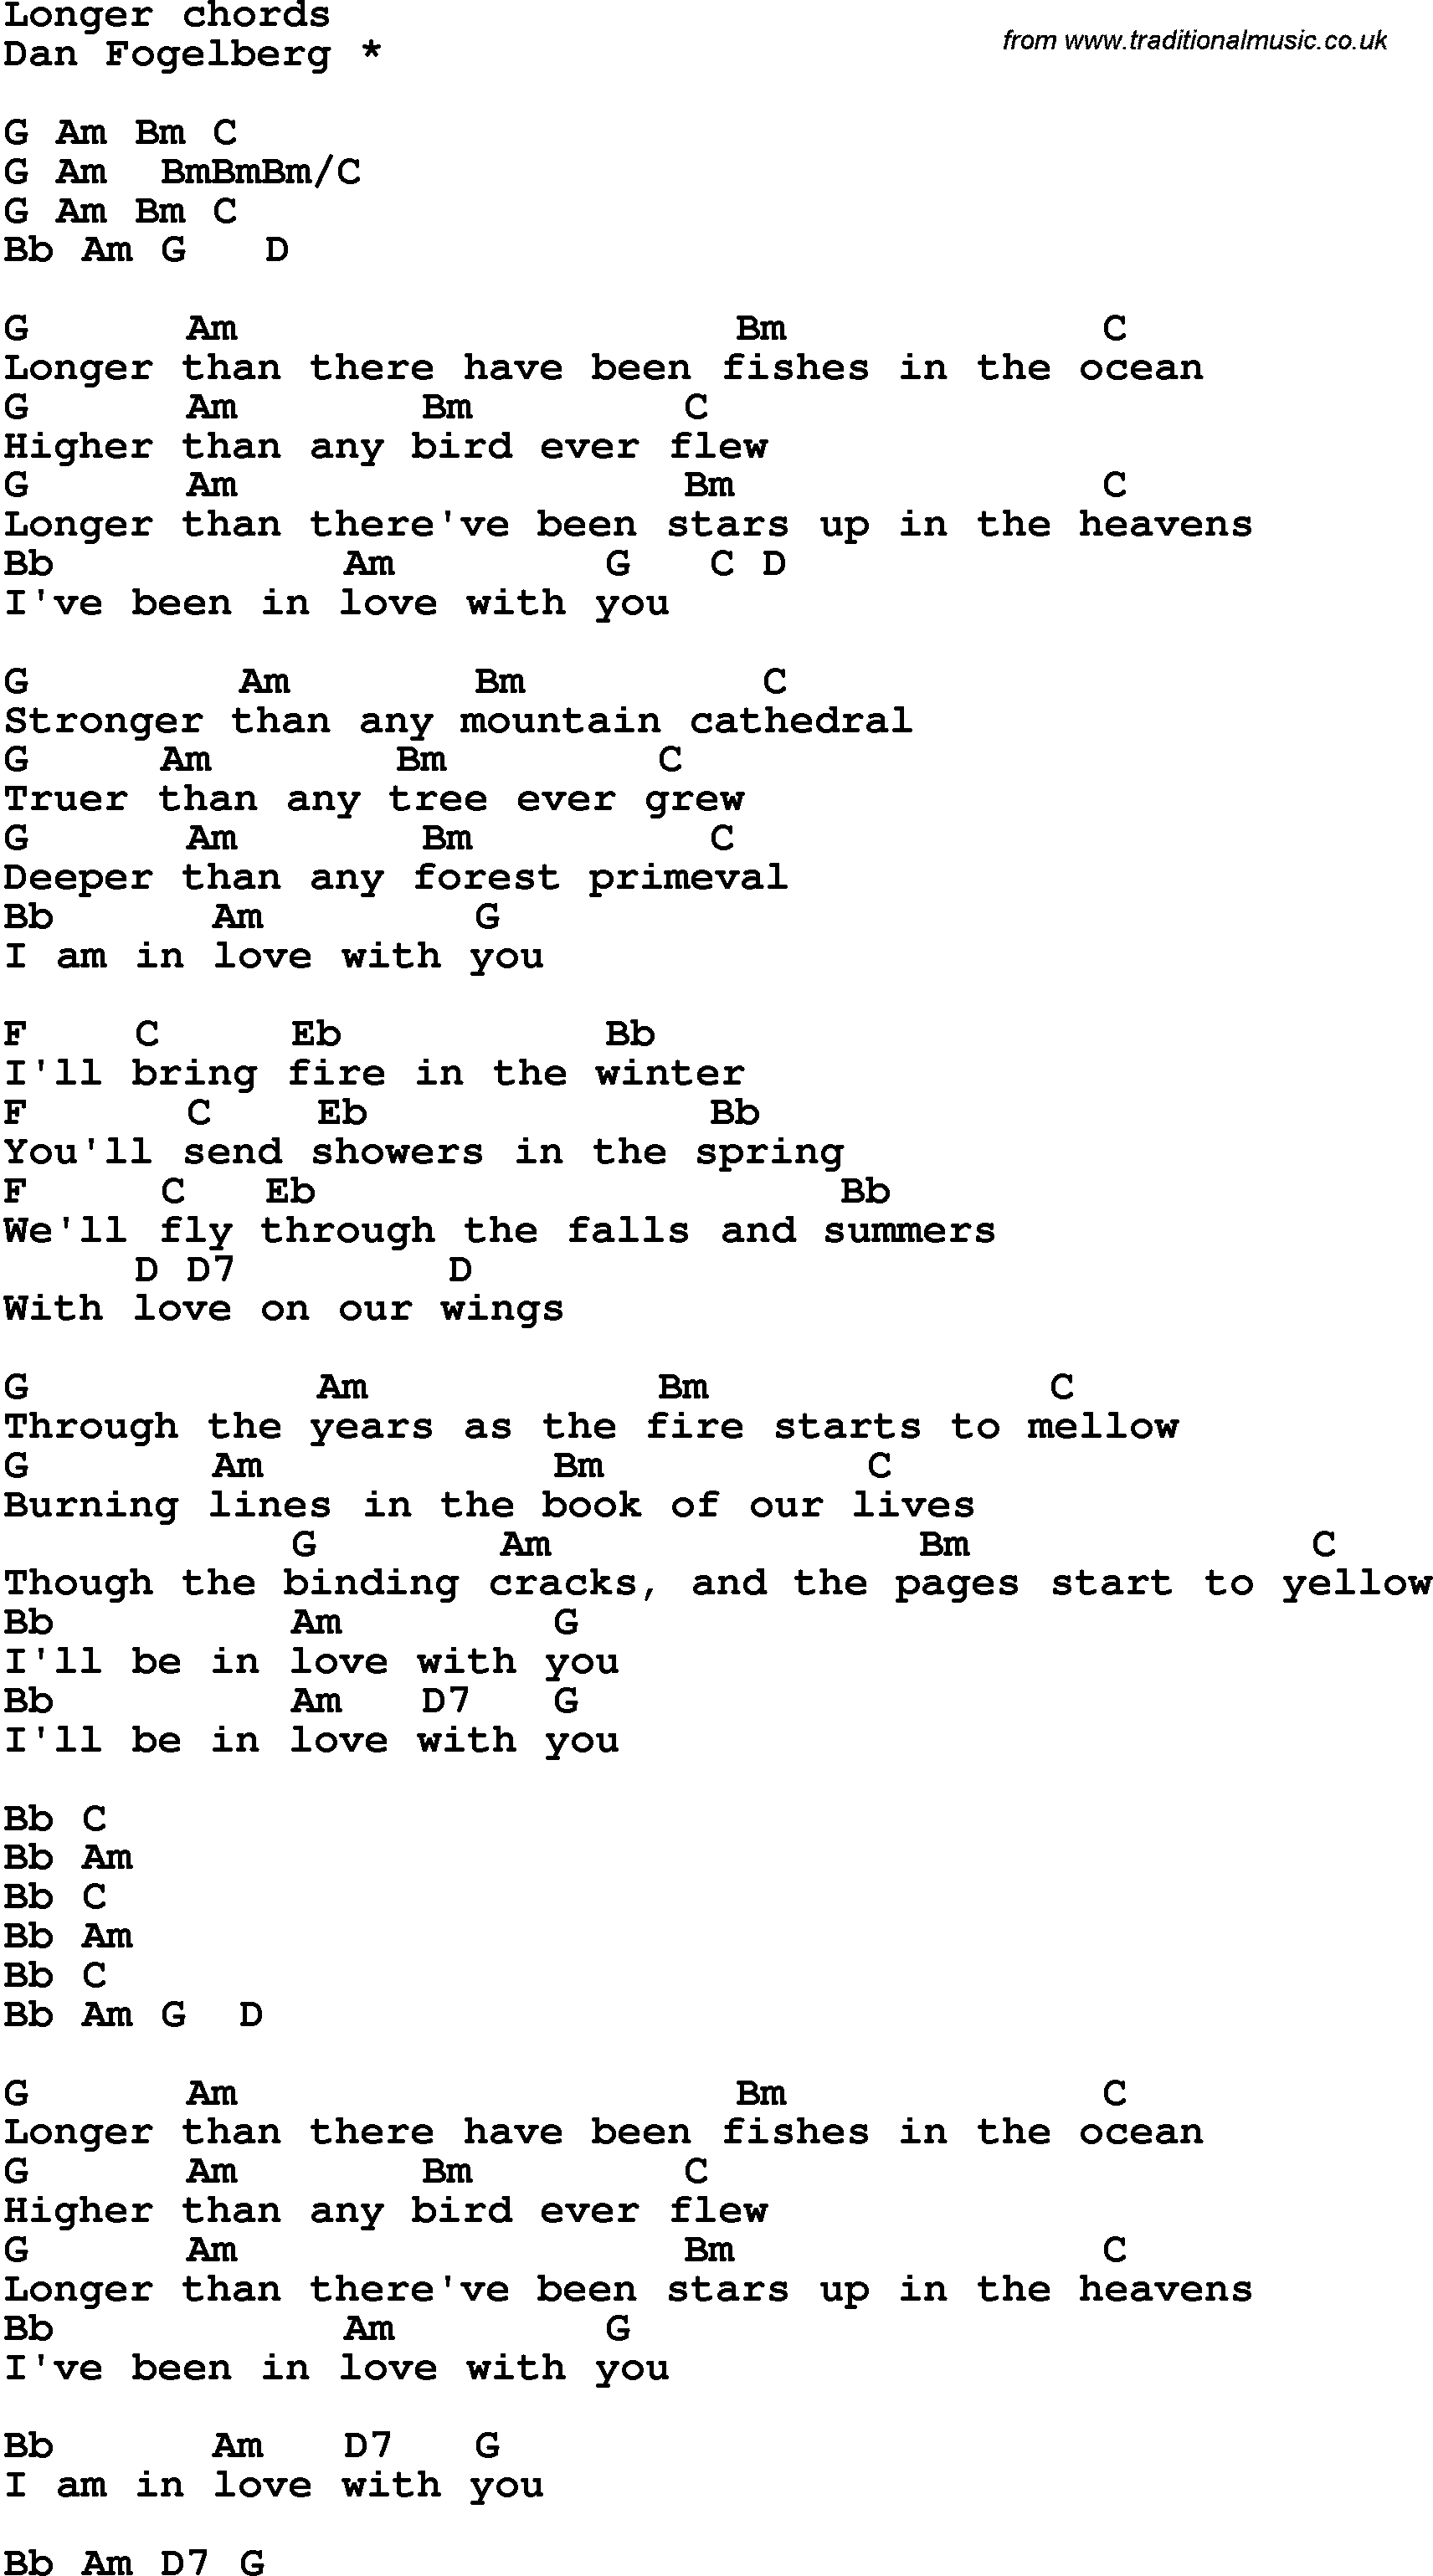 Song Lyrics with guitar chords for Longer